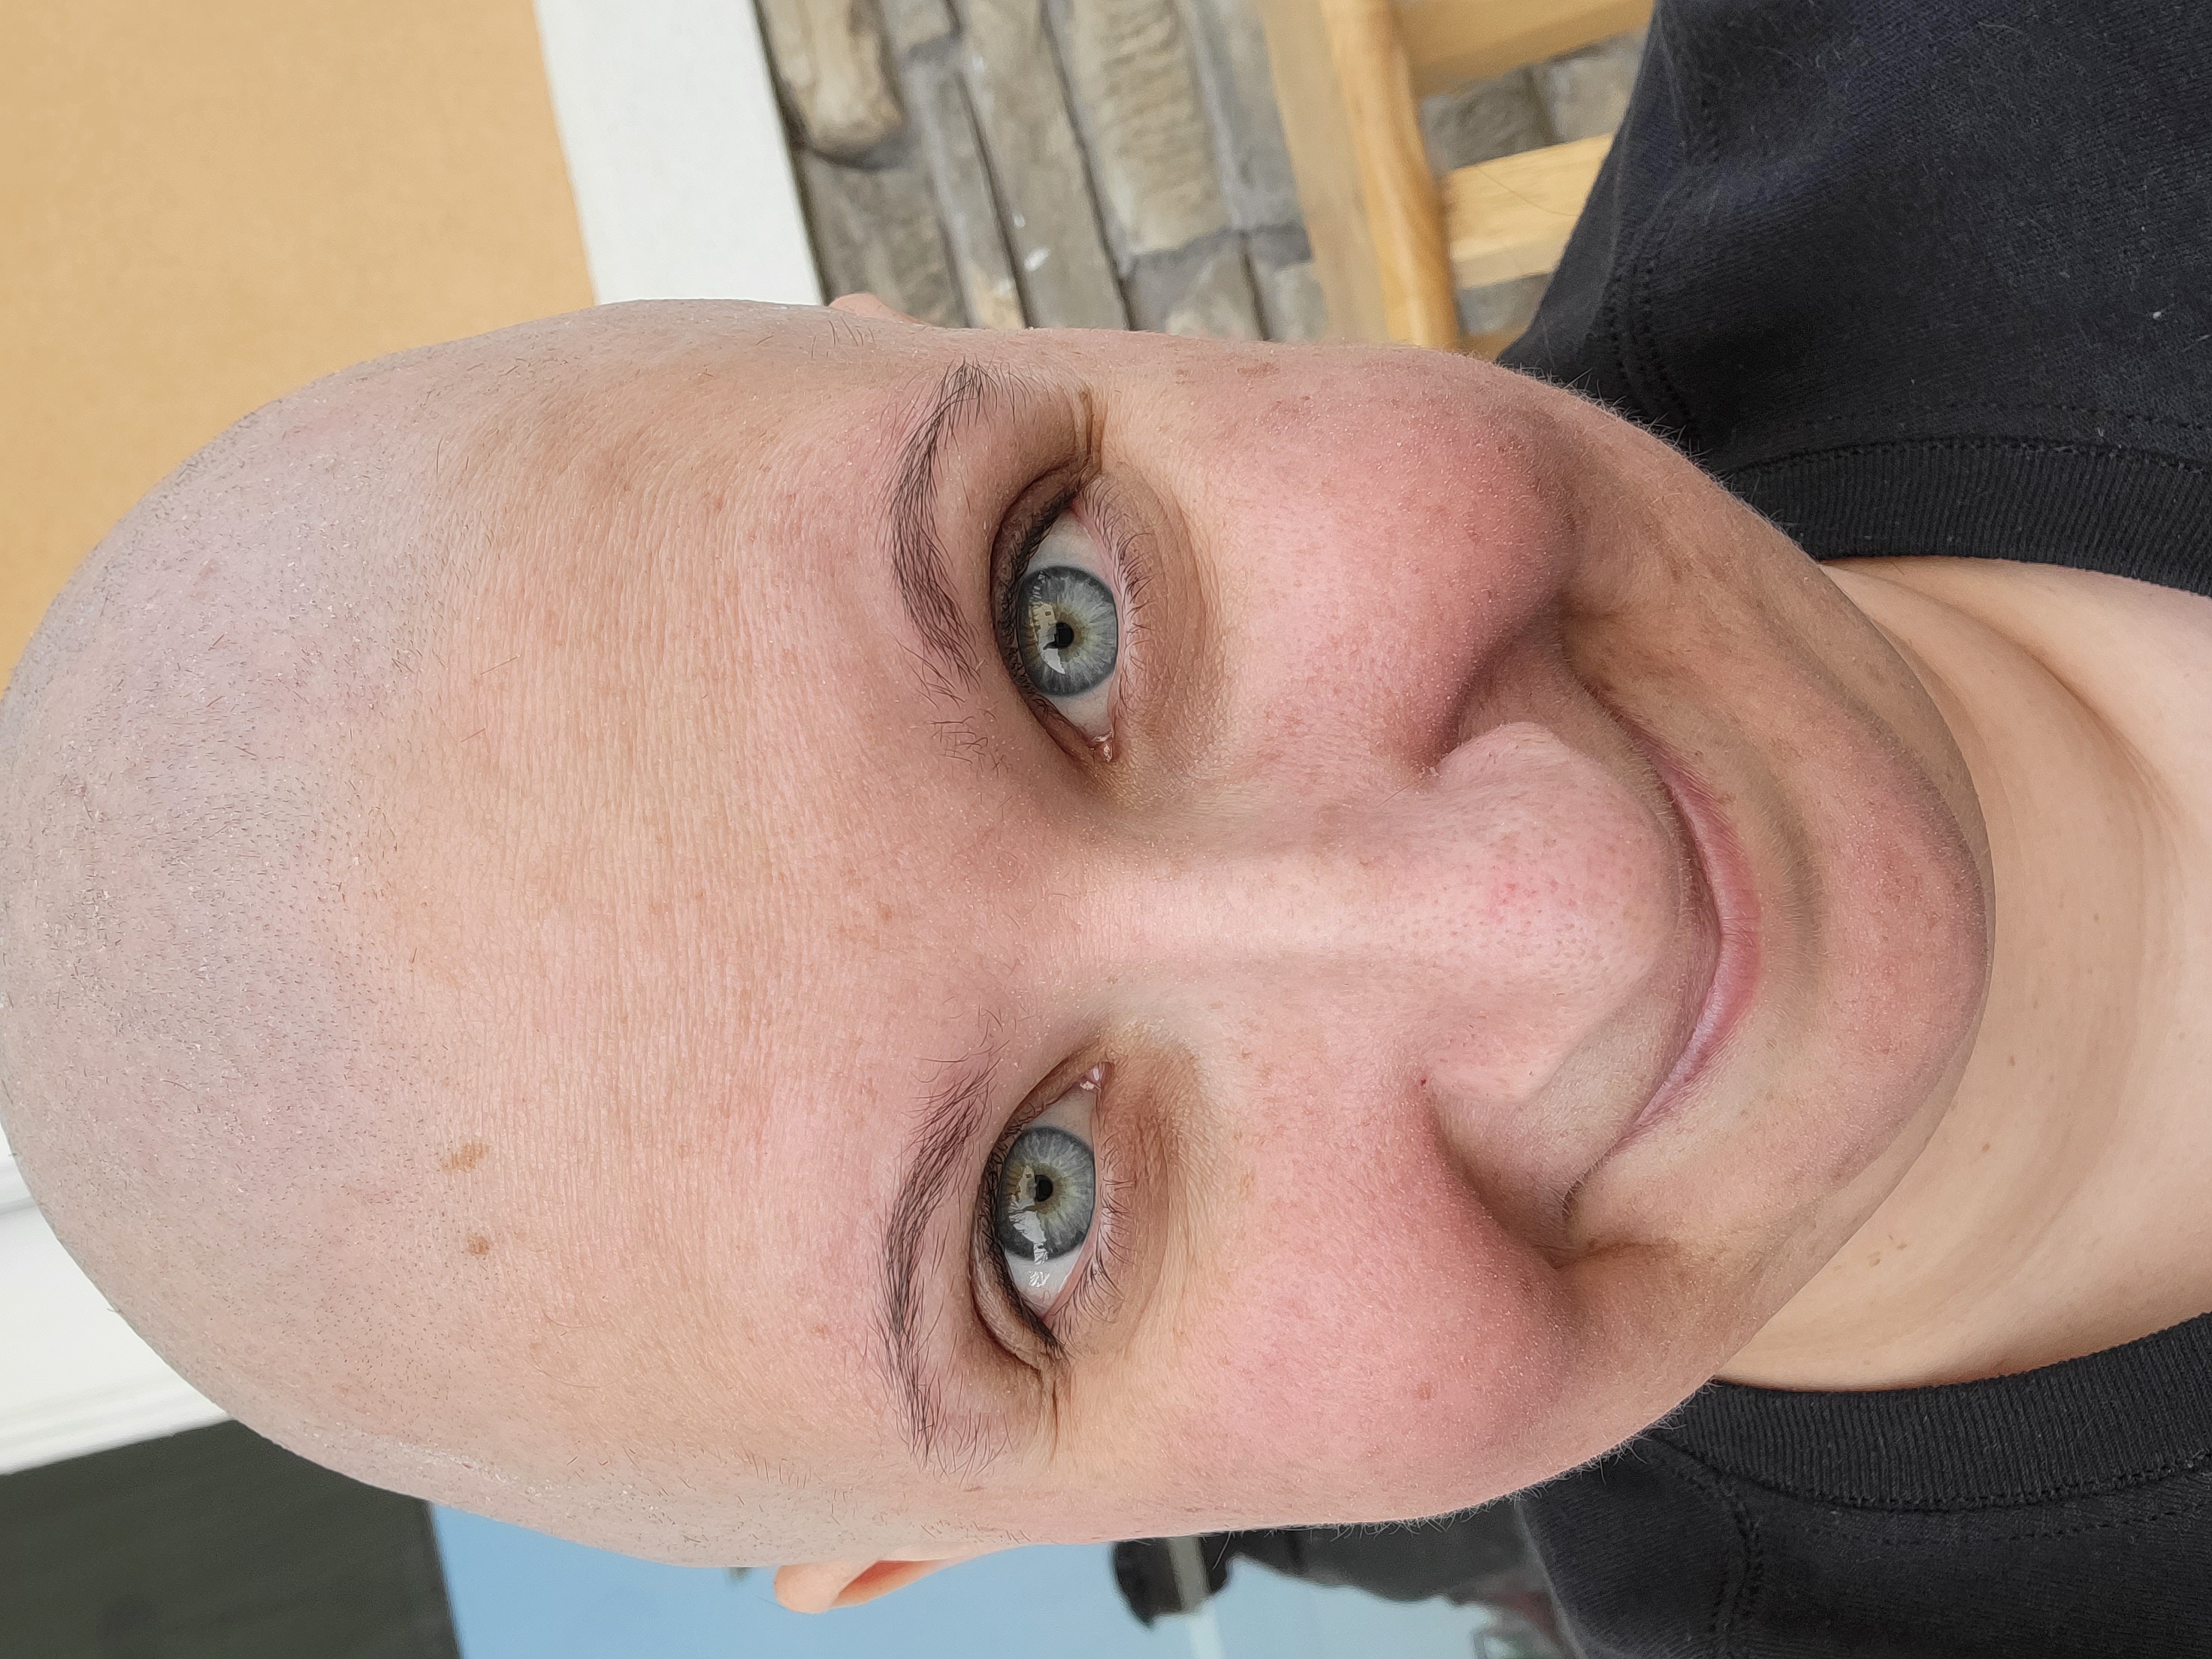 A close up picture of a bald woman who has just shaved her head.